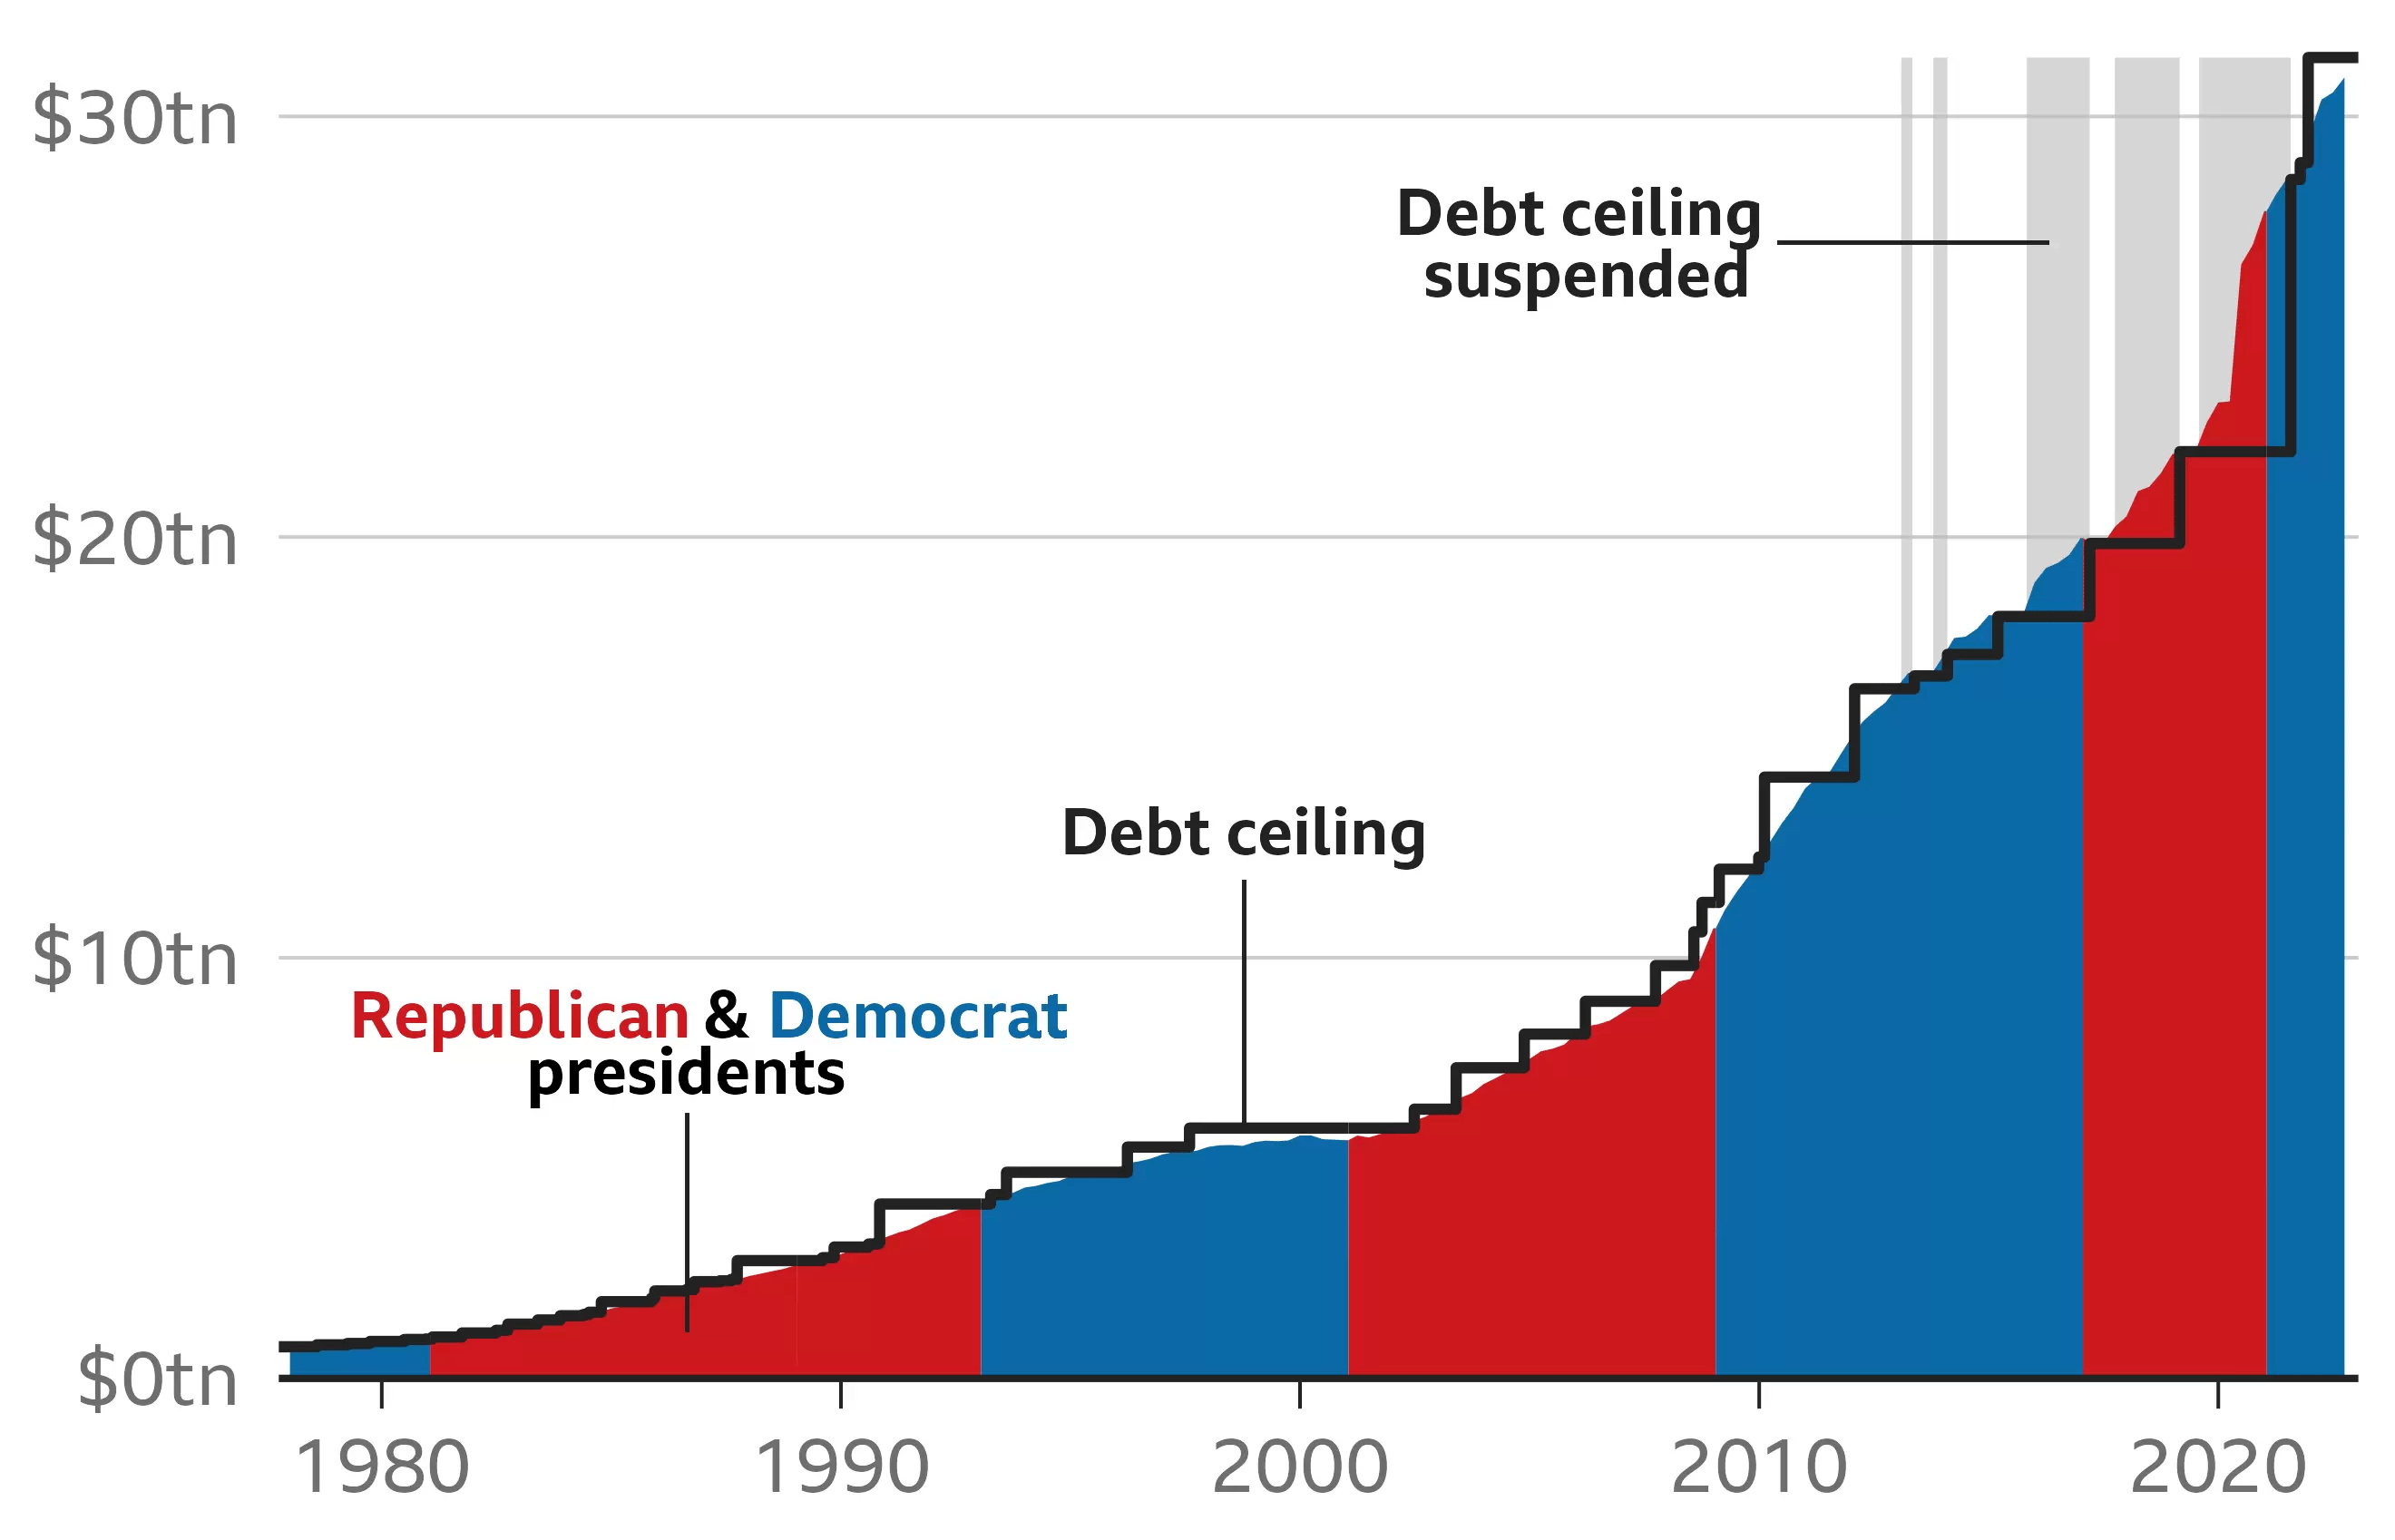 U.S. total gross debt and debt ceiling, USD (trillions). Source: BBC